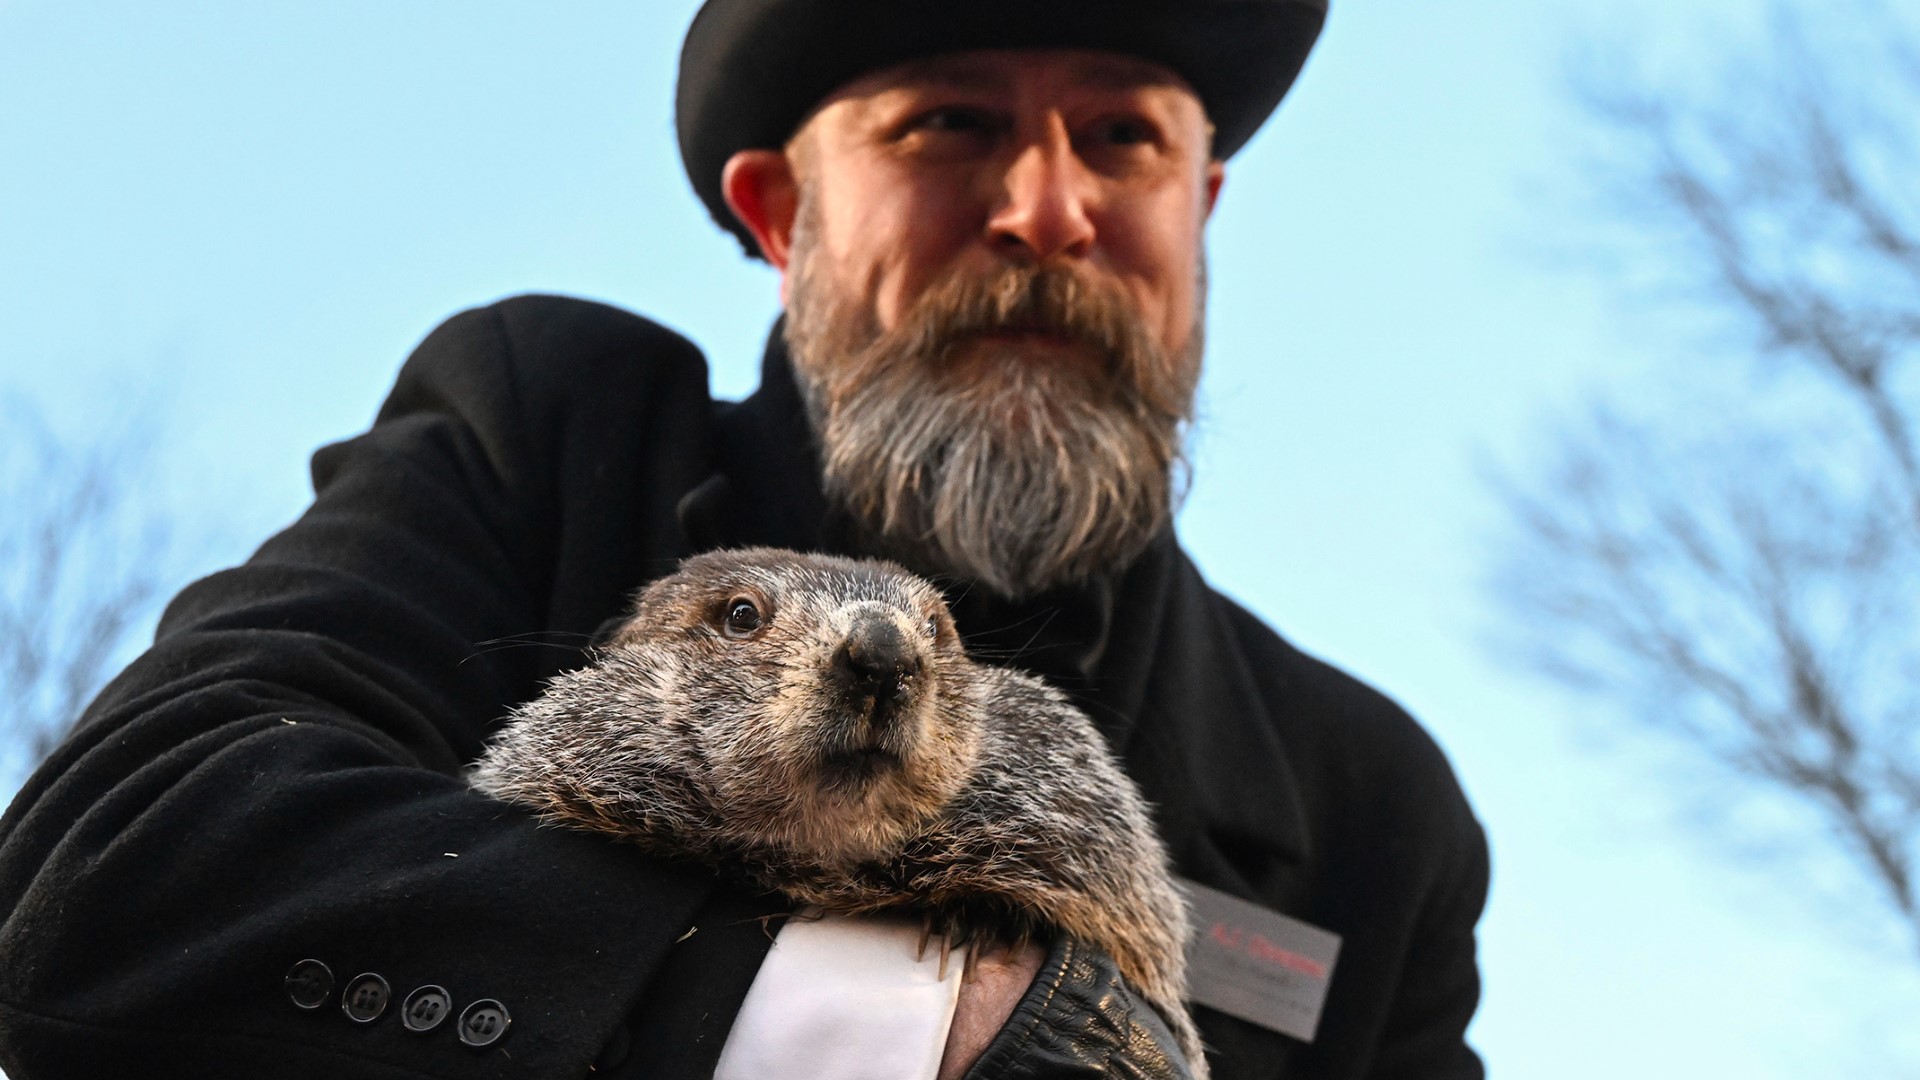 PETA wants to replace Punxsutawney Phil with a giant gold coin